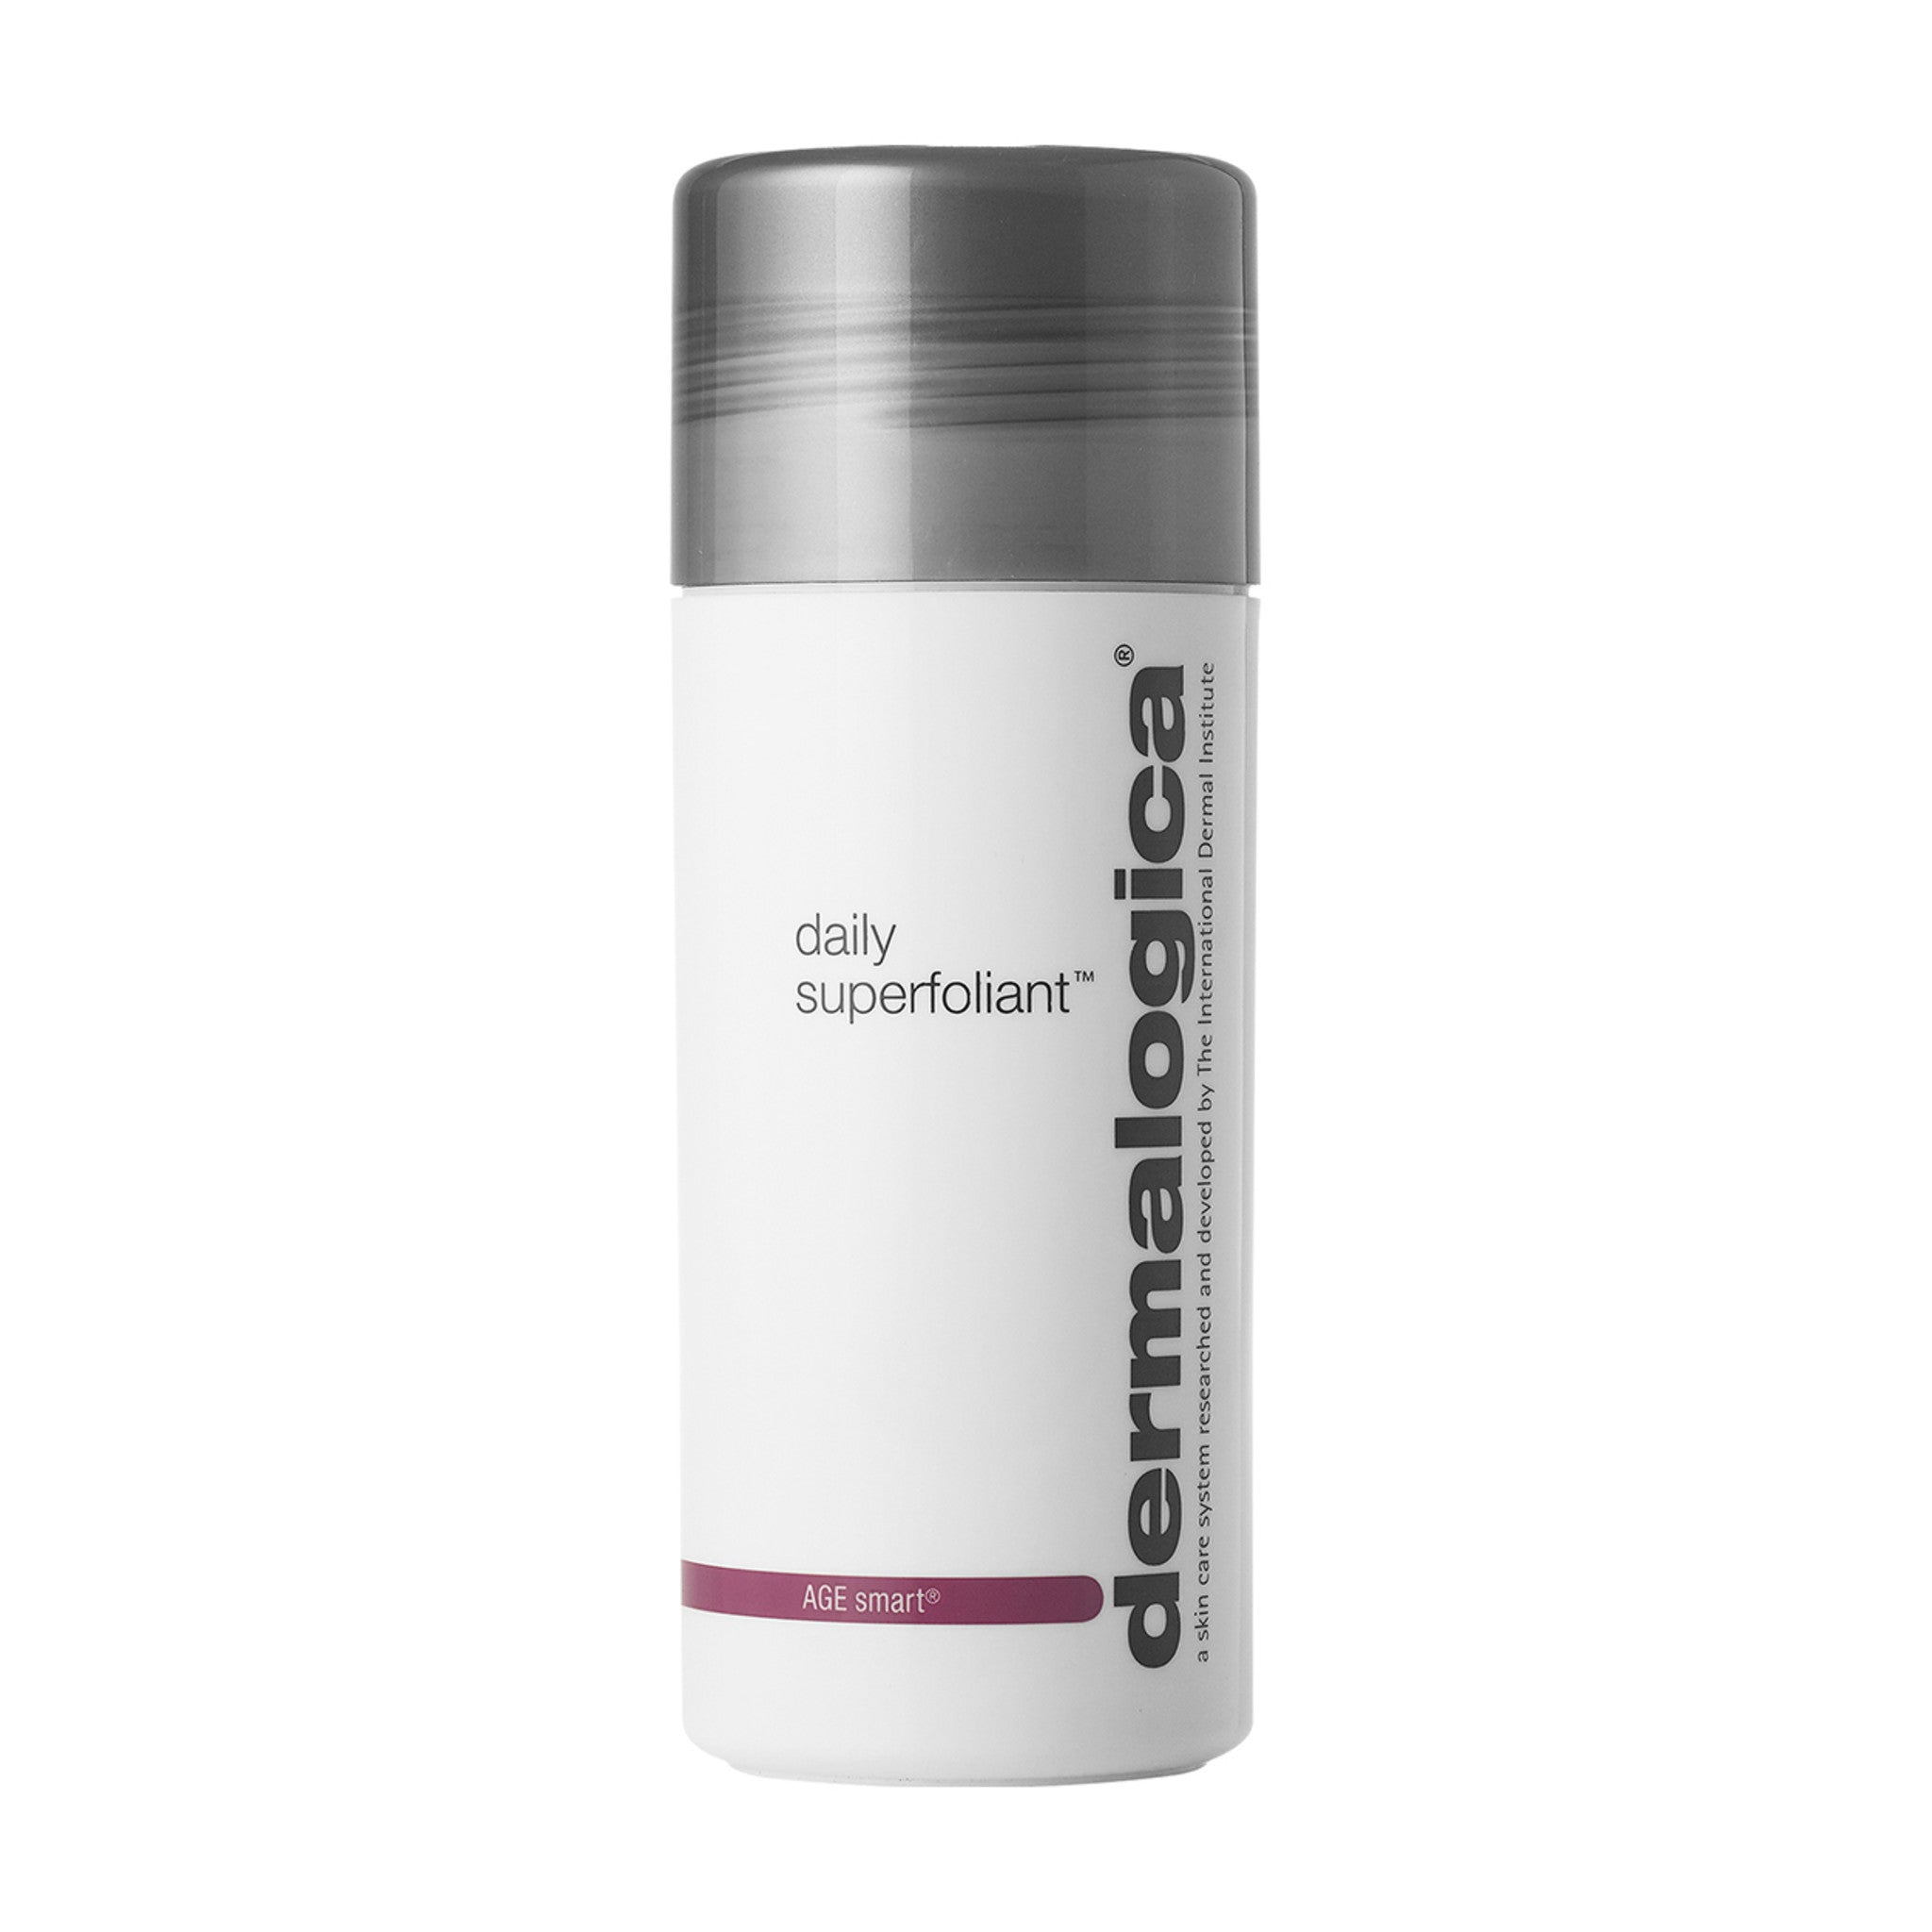 Dermalogica Daily Superfoliant main image.